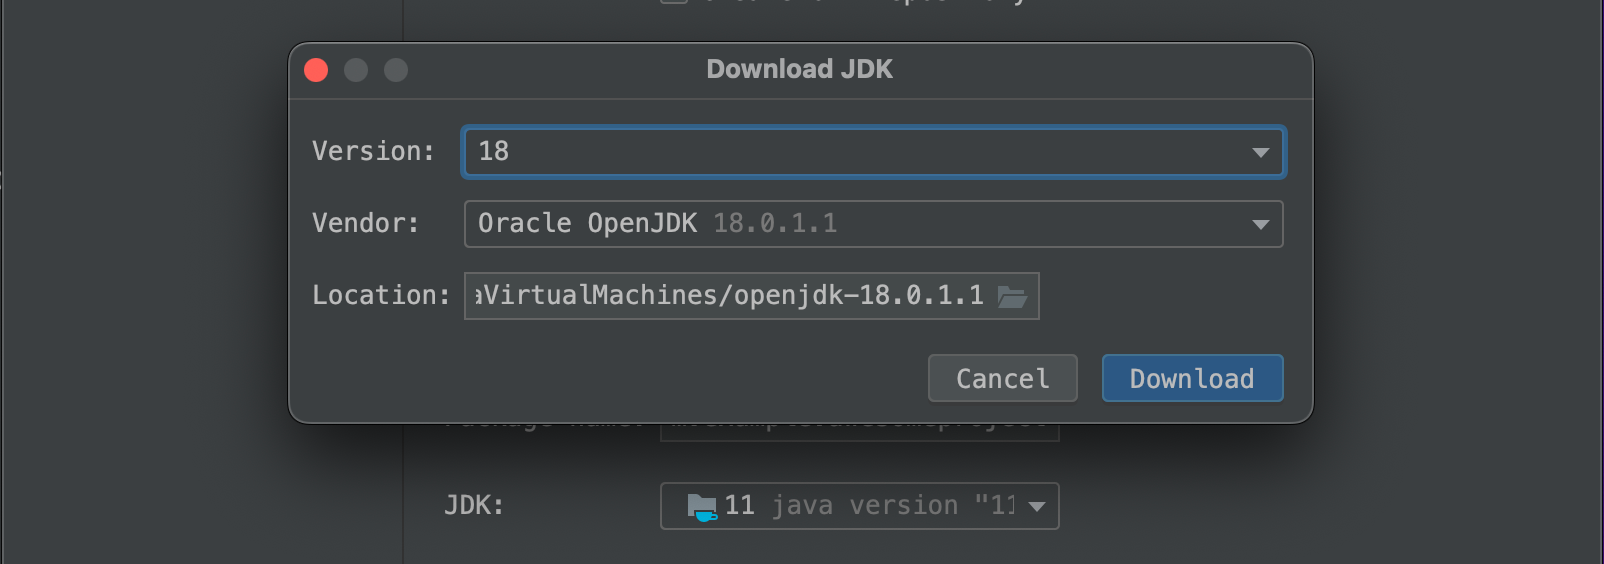 Select the JDK version to install